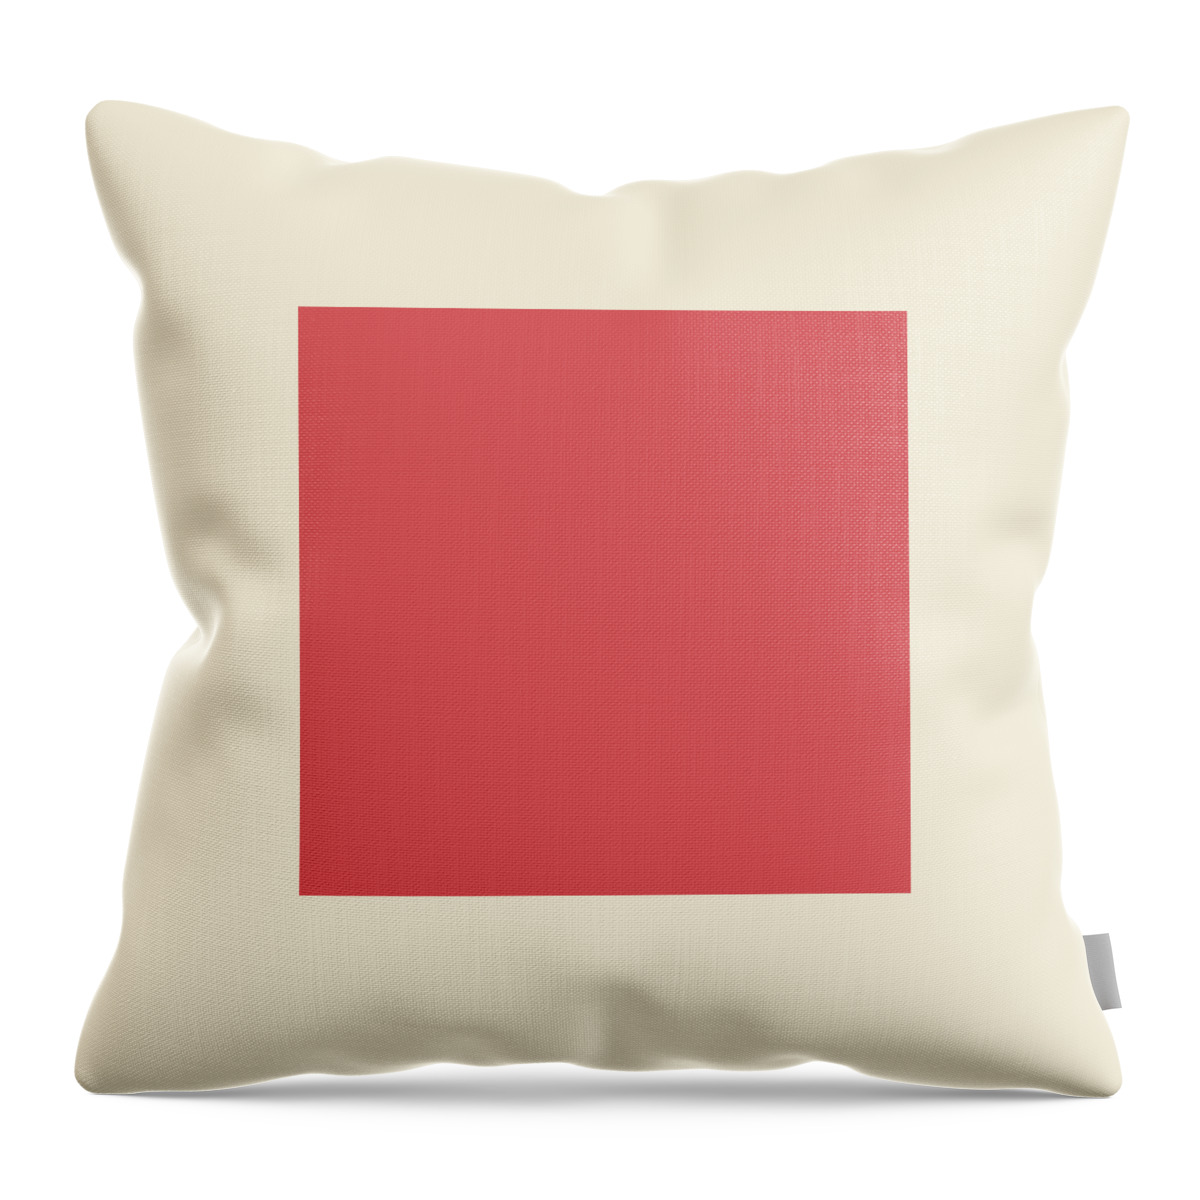 Medium. Coral Throw Pillow featuring the digital art Medium Coral Solid Plain Color for Home Decor Pillows and Blanks by Delynn Addams